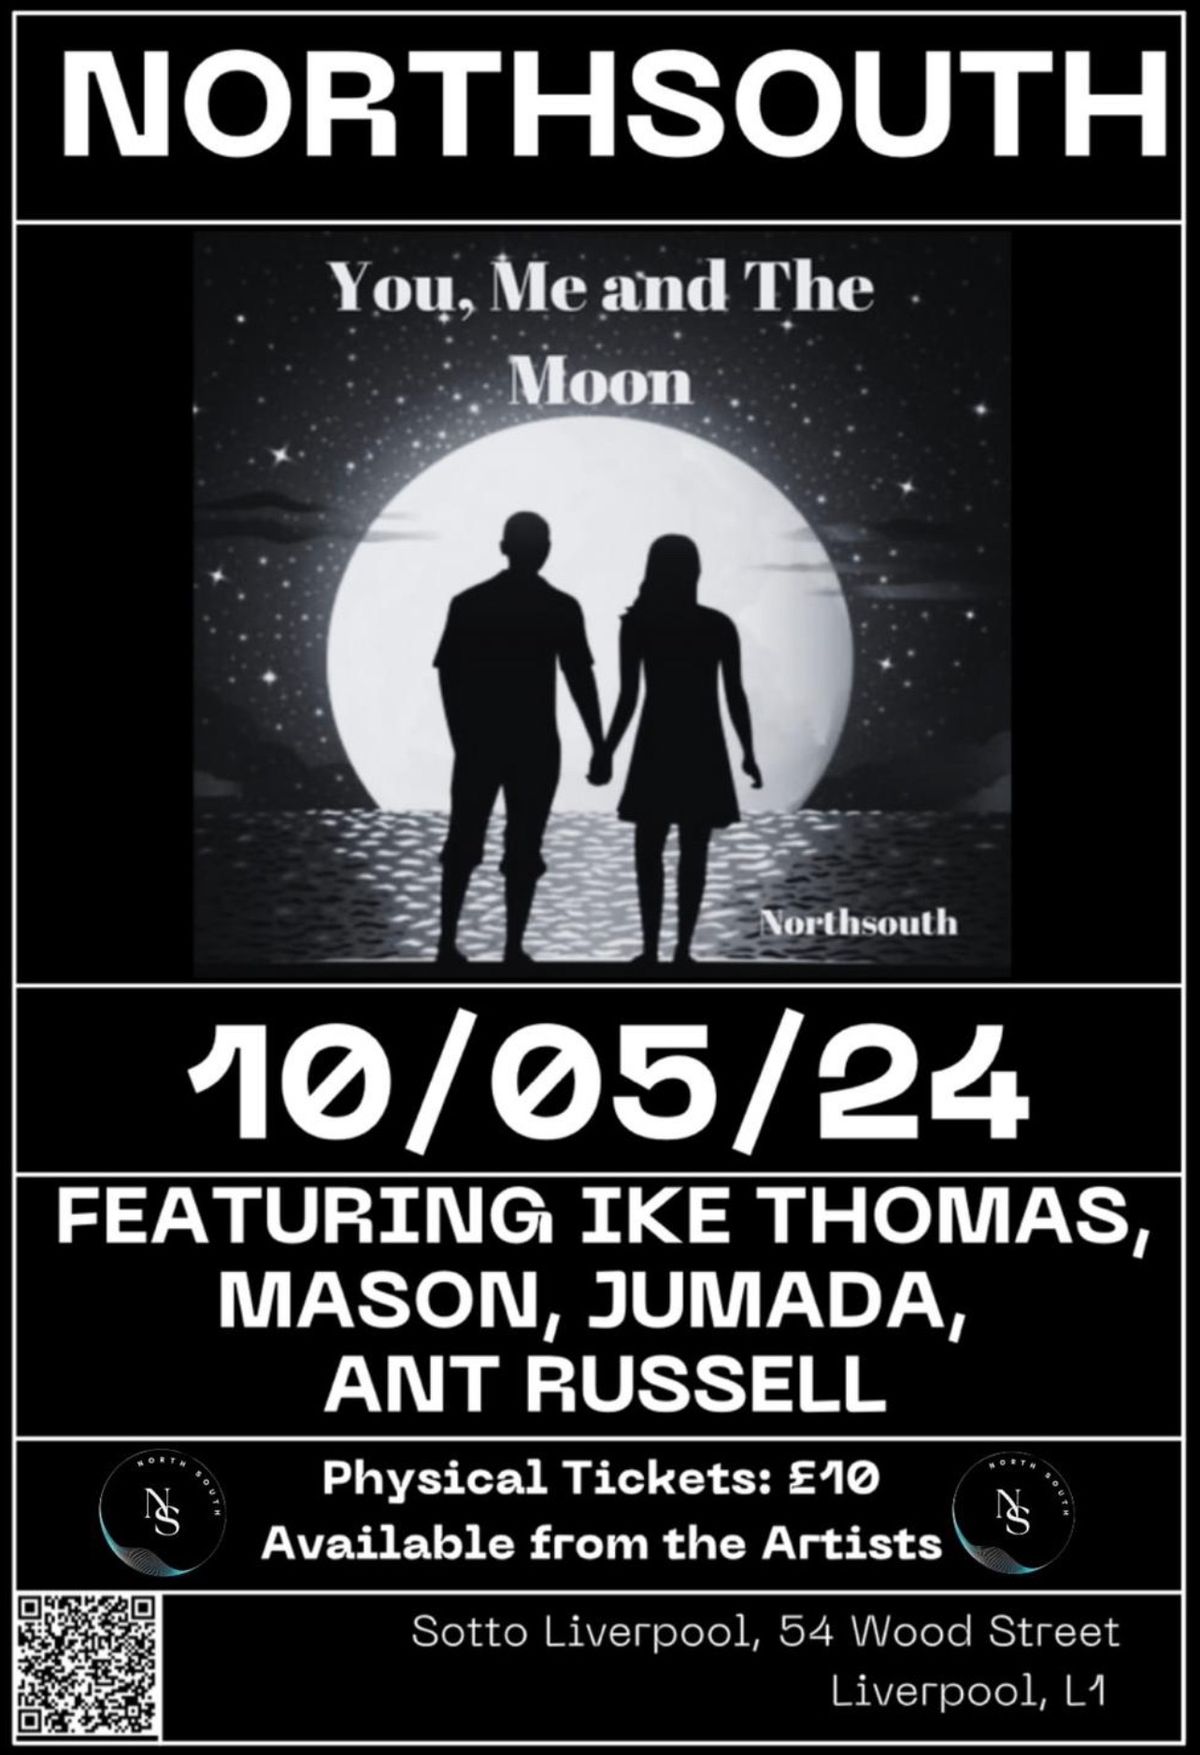 #YouMeandTheMoon single release - Northsouth, Ant Russell, Jumada, Mason and Ike Thomas